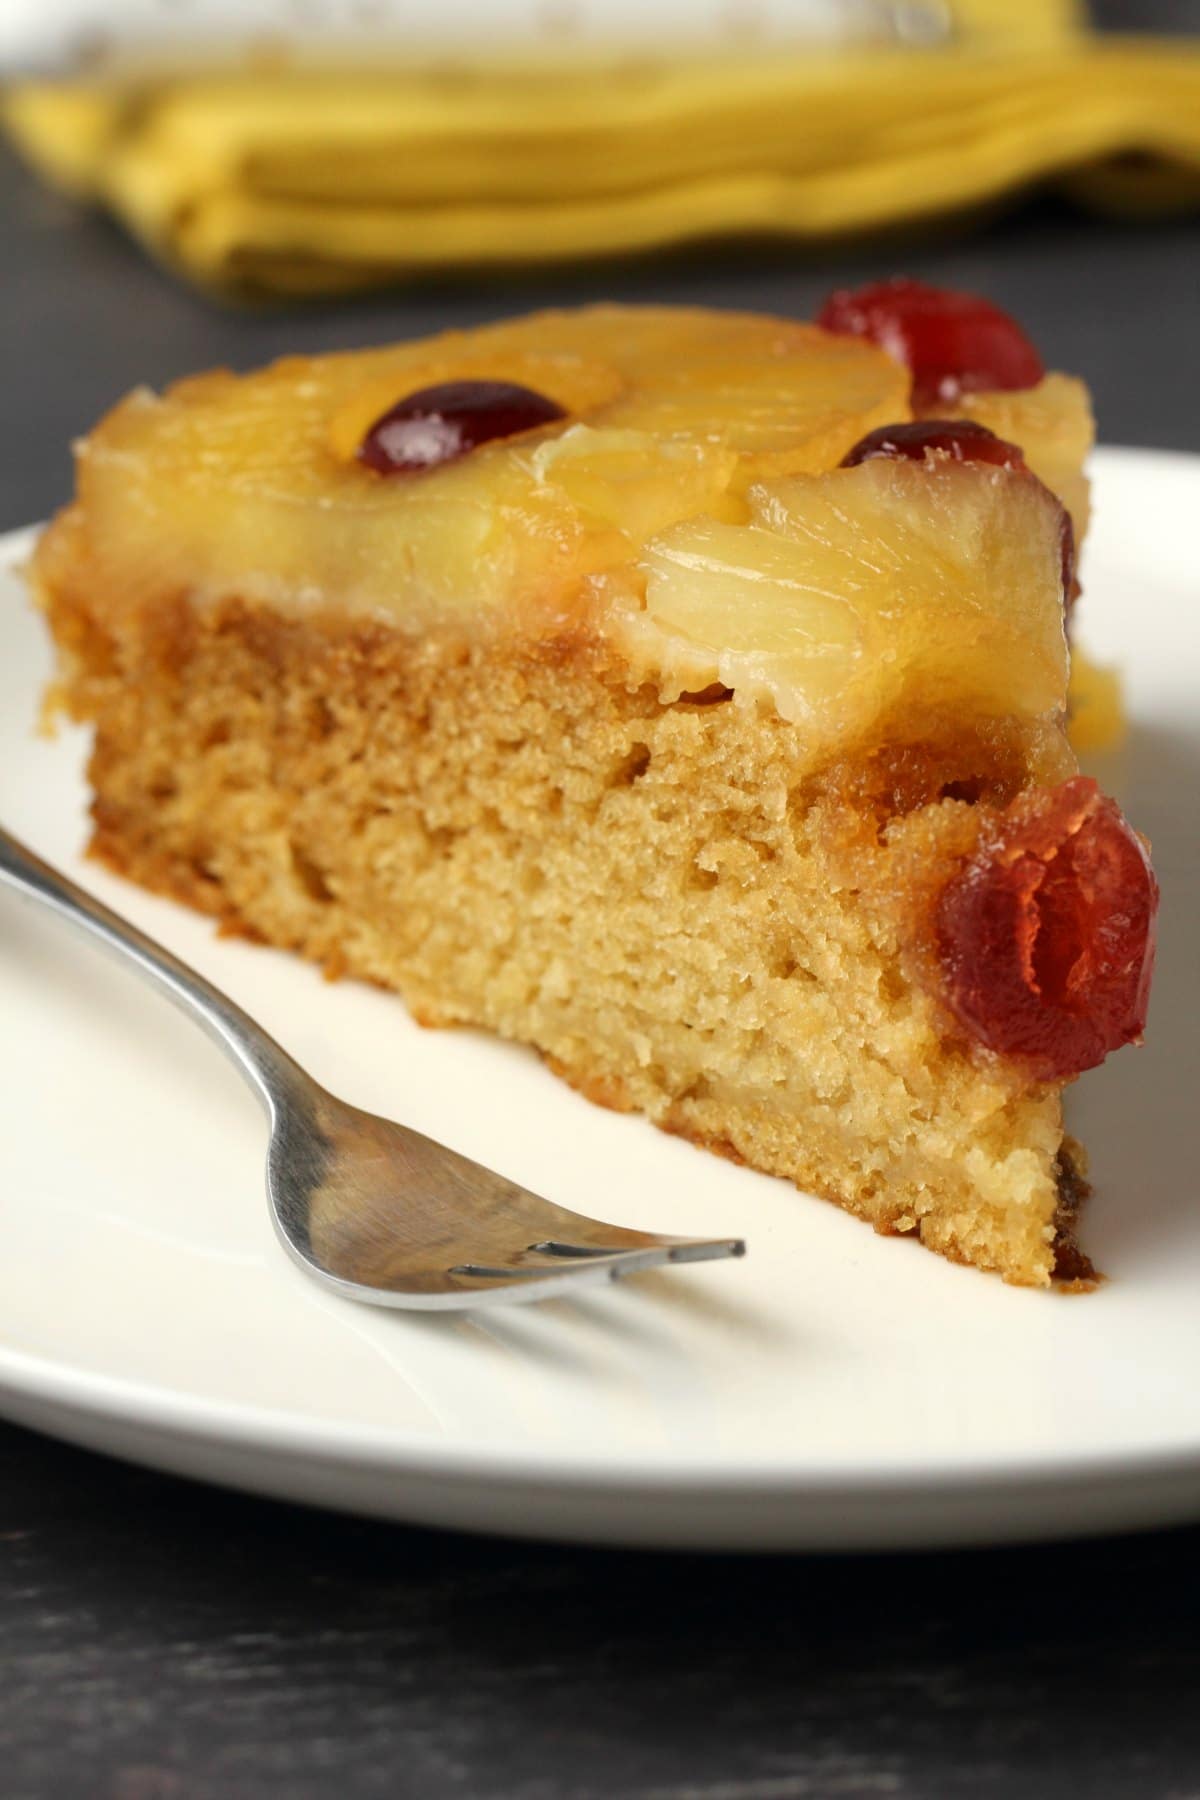 A slice of vegan pineapple upside down cake on a white plate with a cake fork.